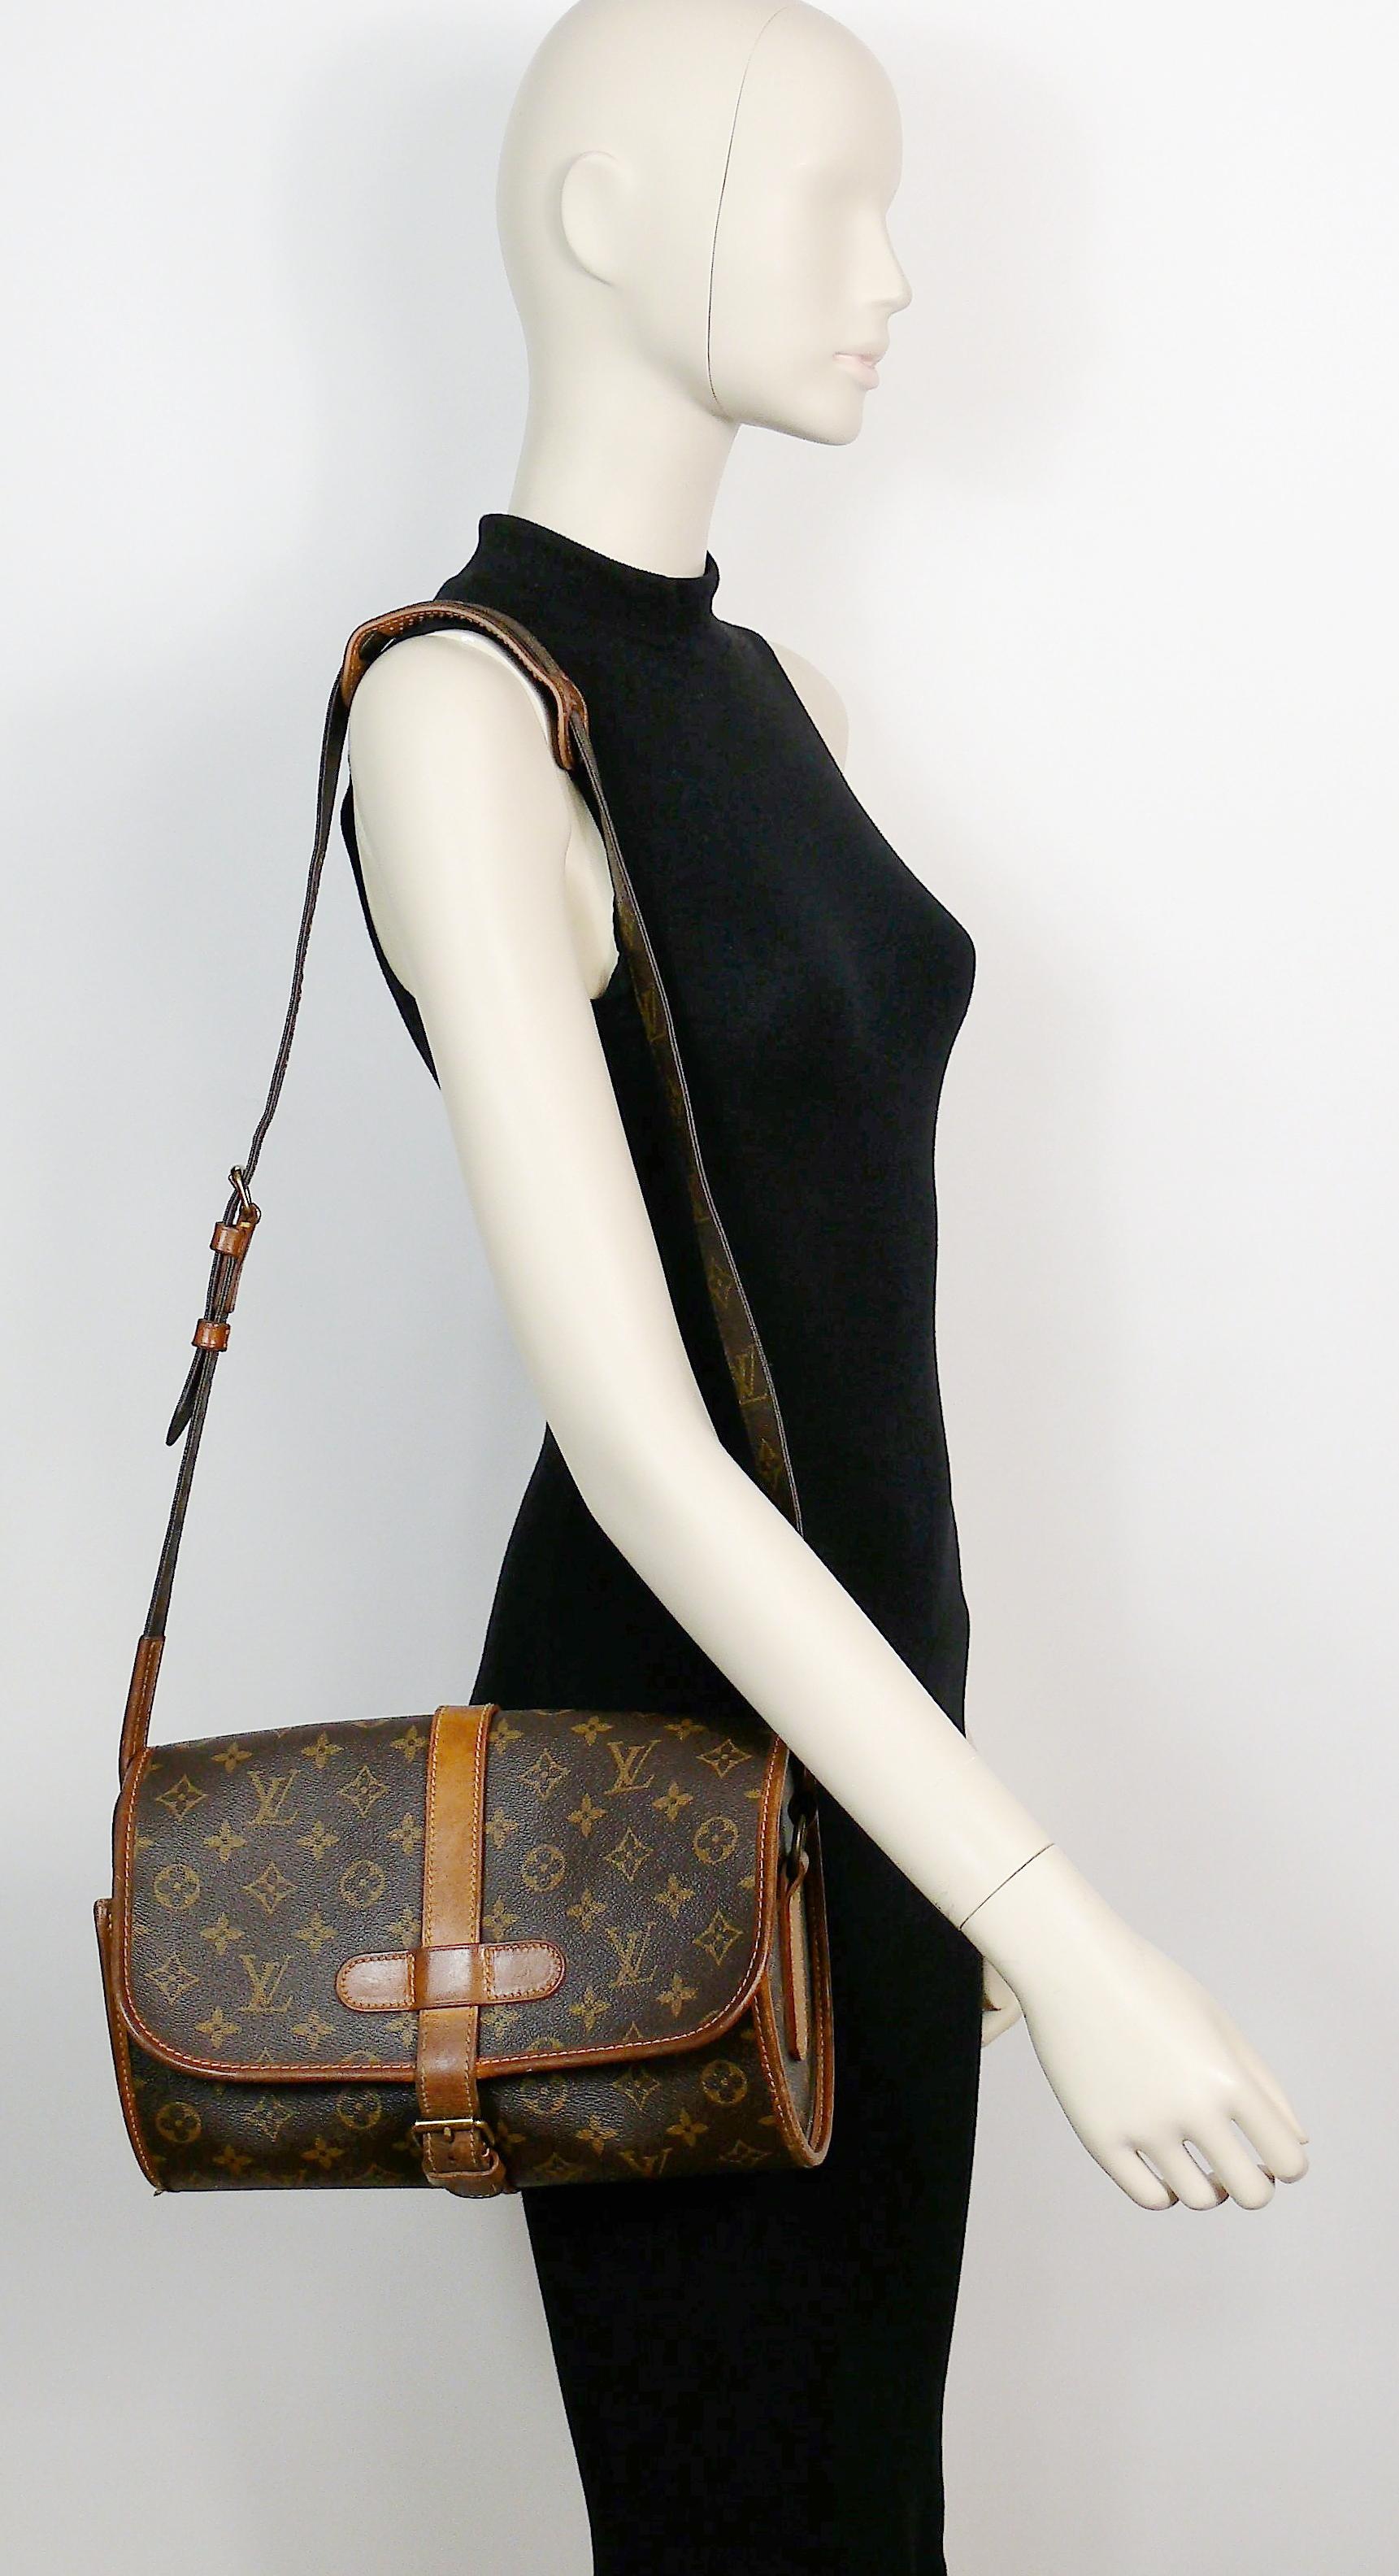 LOUIS VUITTON vintage 1990 MARNE bag featuring the iconic monogram coated canvas print with leather details.

Leather belt closure on the front.
Adjustable strap that allows to worn the bag across the body or on one shoulder. 
Brown lining.
One